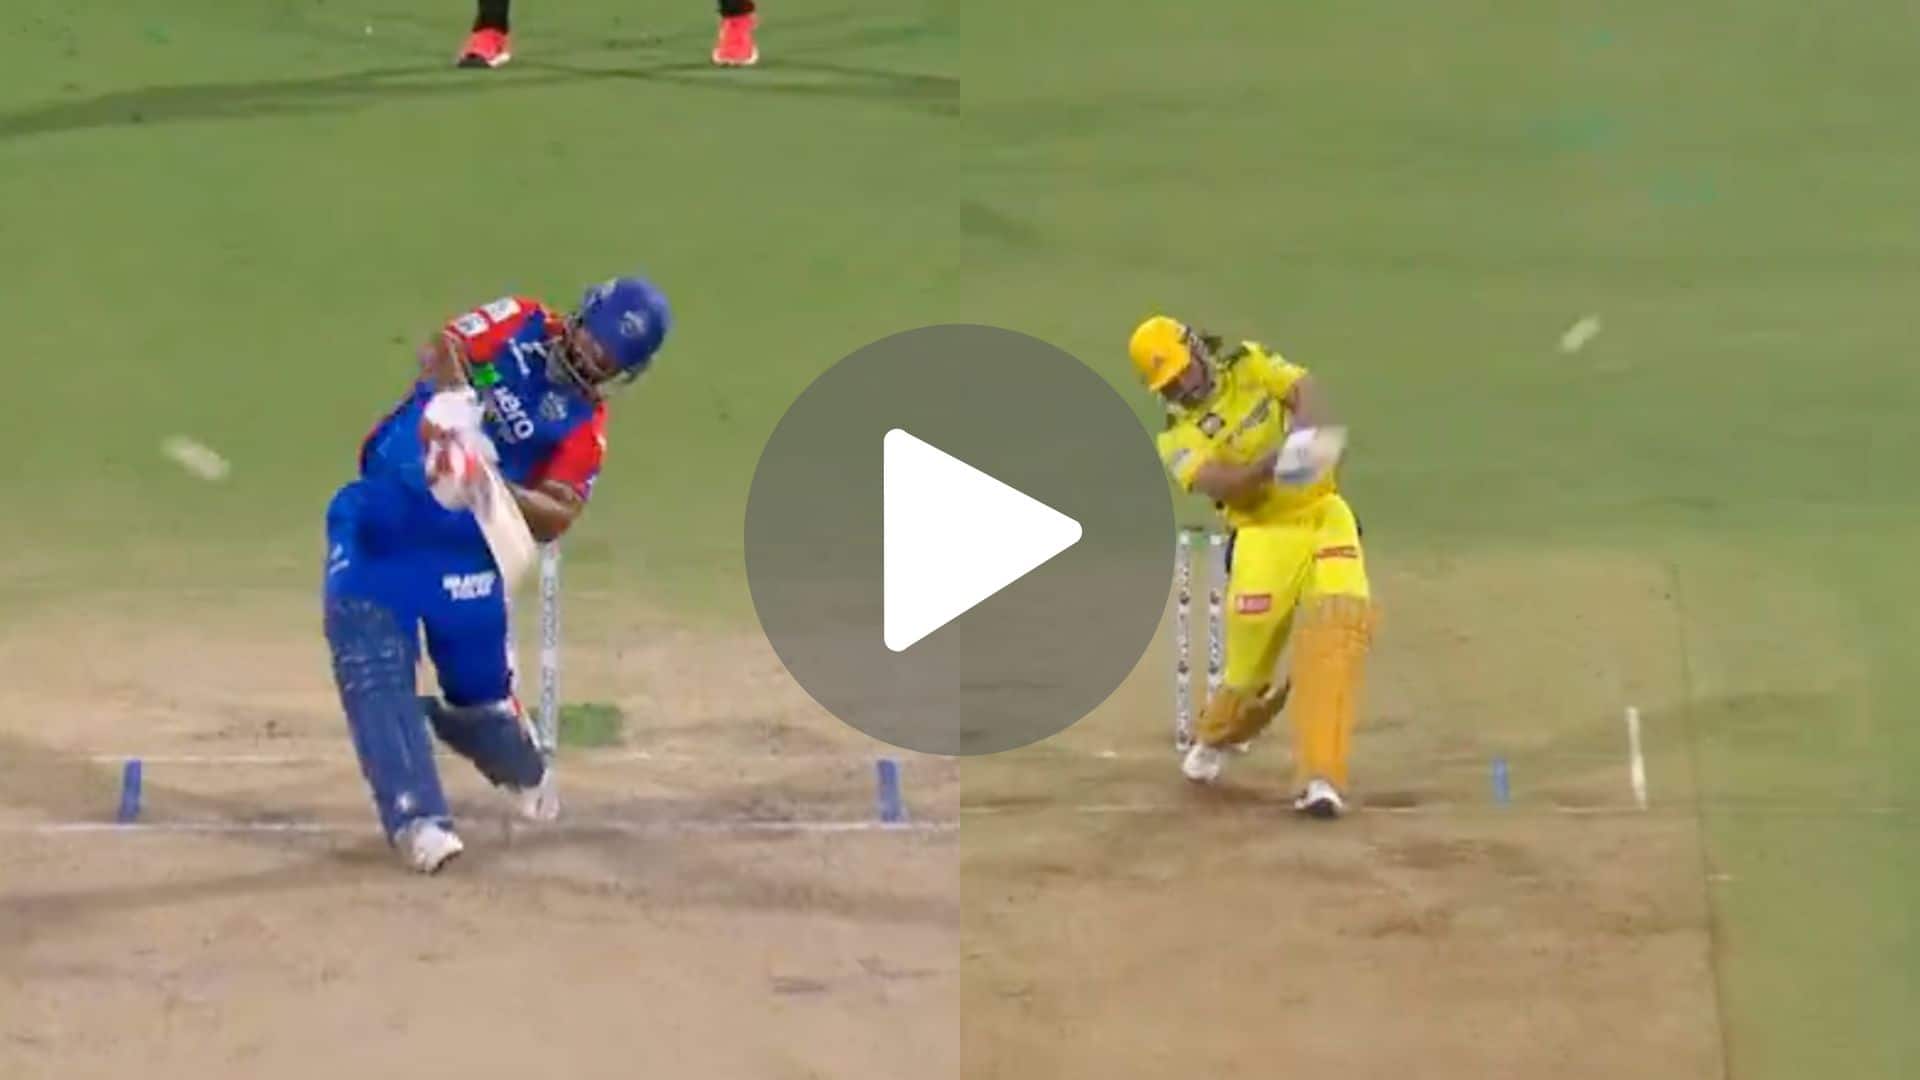 [Watch] Rishabh Pant Turns 'Left-Handed' MS Dhoni As He Hits A Gigantic Six' Off Nitish Reddy